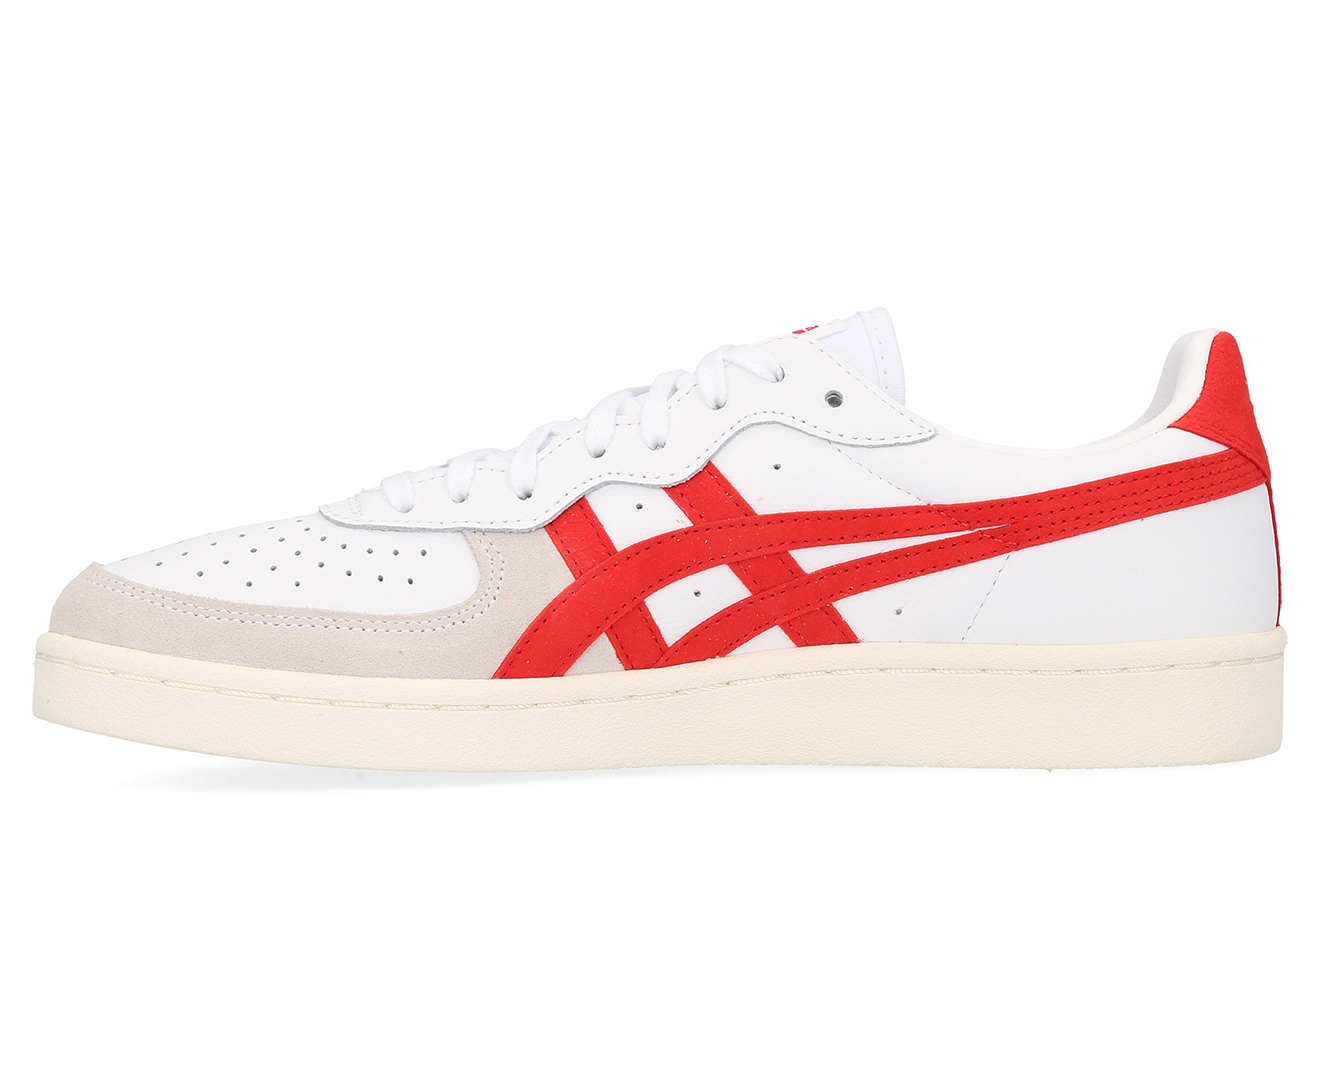 Onitsuka Tiger GSM Sneakers - White/Classic Red | Catch.co.nz